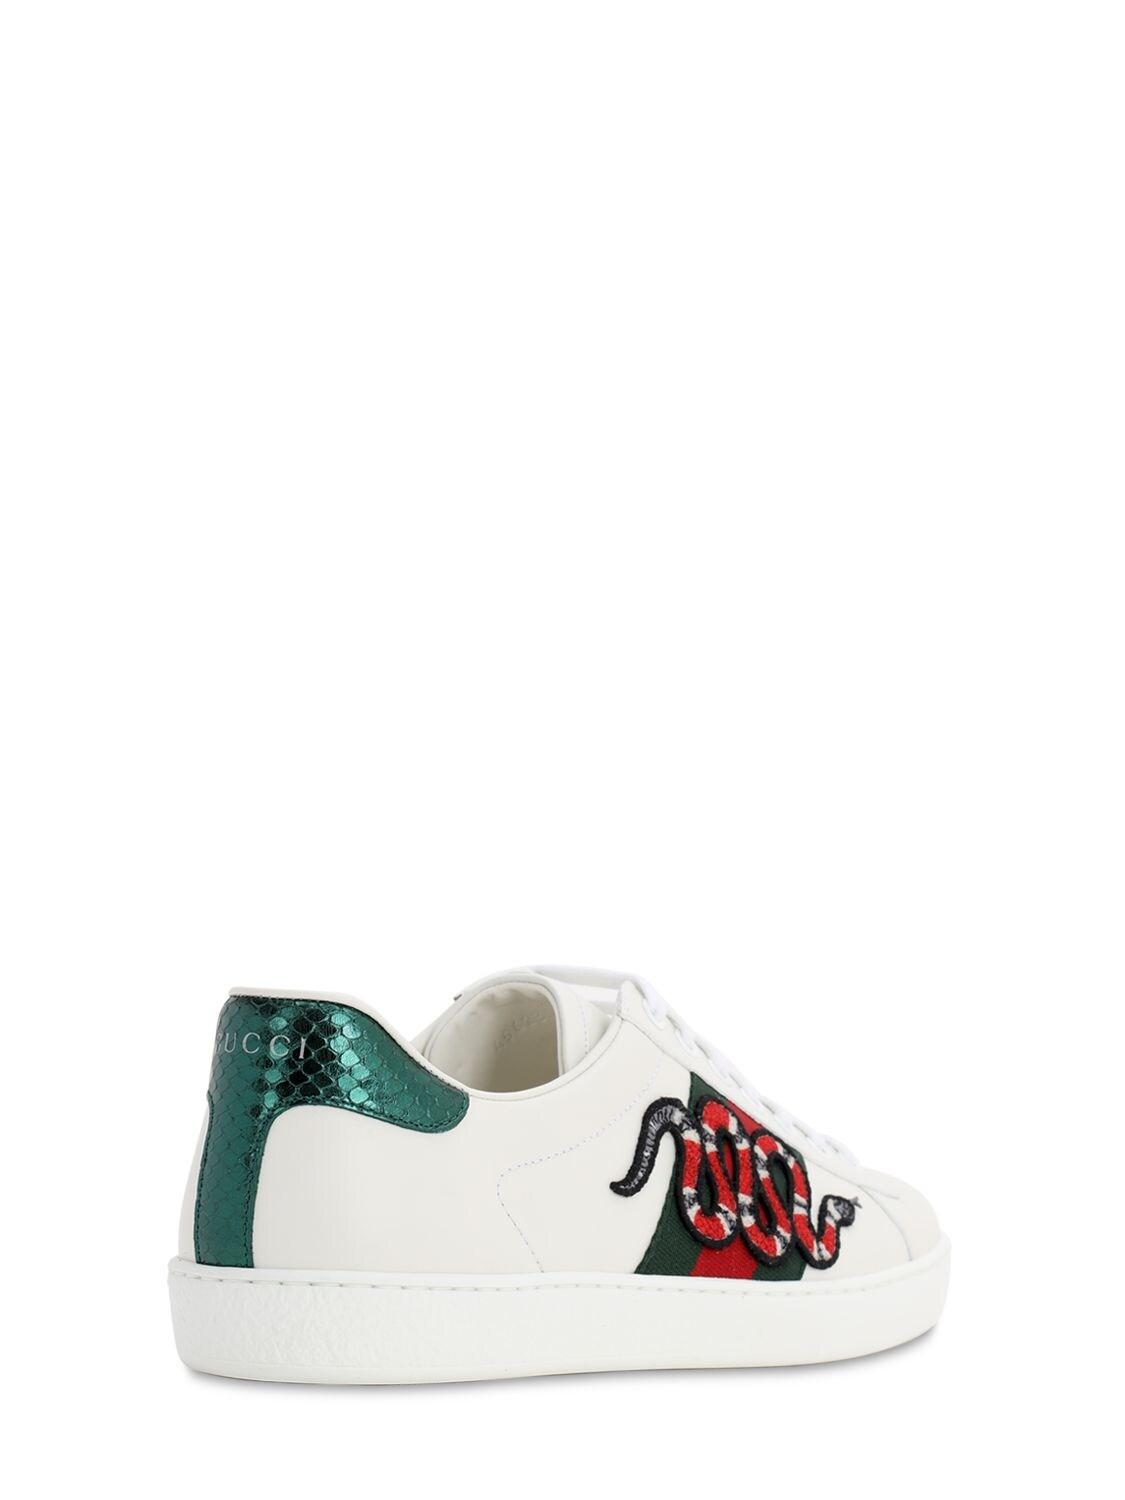 Gucci Ace Embroidered Sneaker in White for Men | Lyst